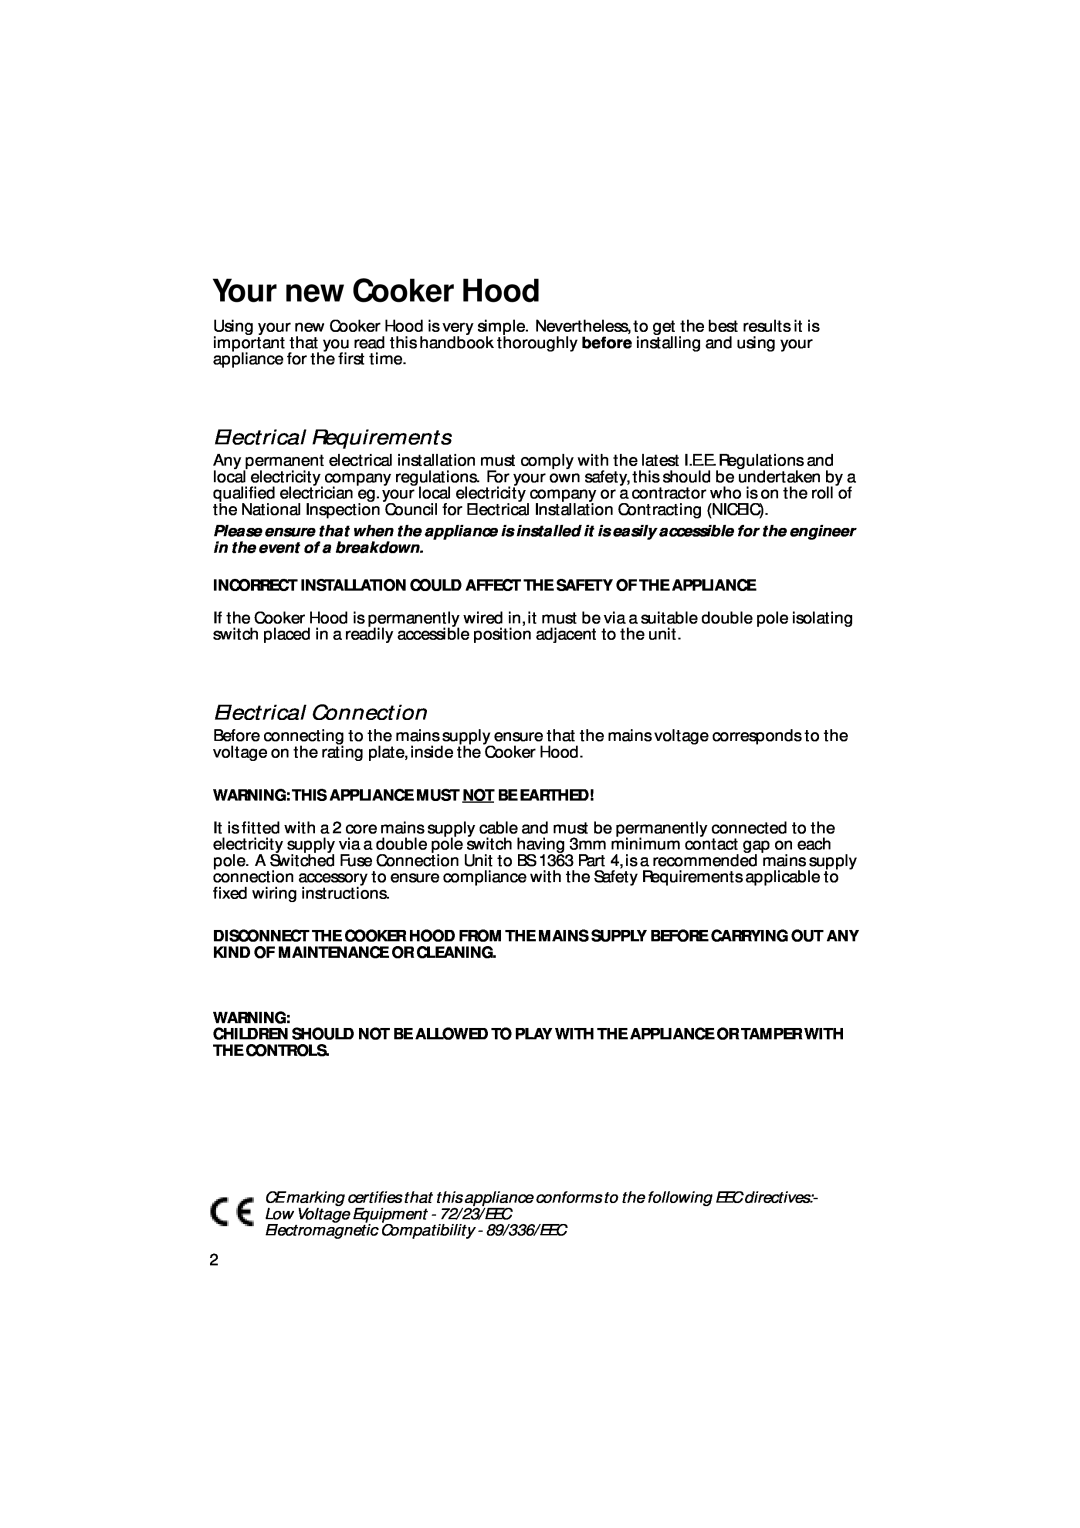 Creda CRV10 manual Your new Cooker Hood, Electrical Requirements, Electrical Connection 